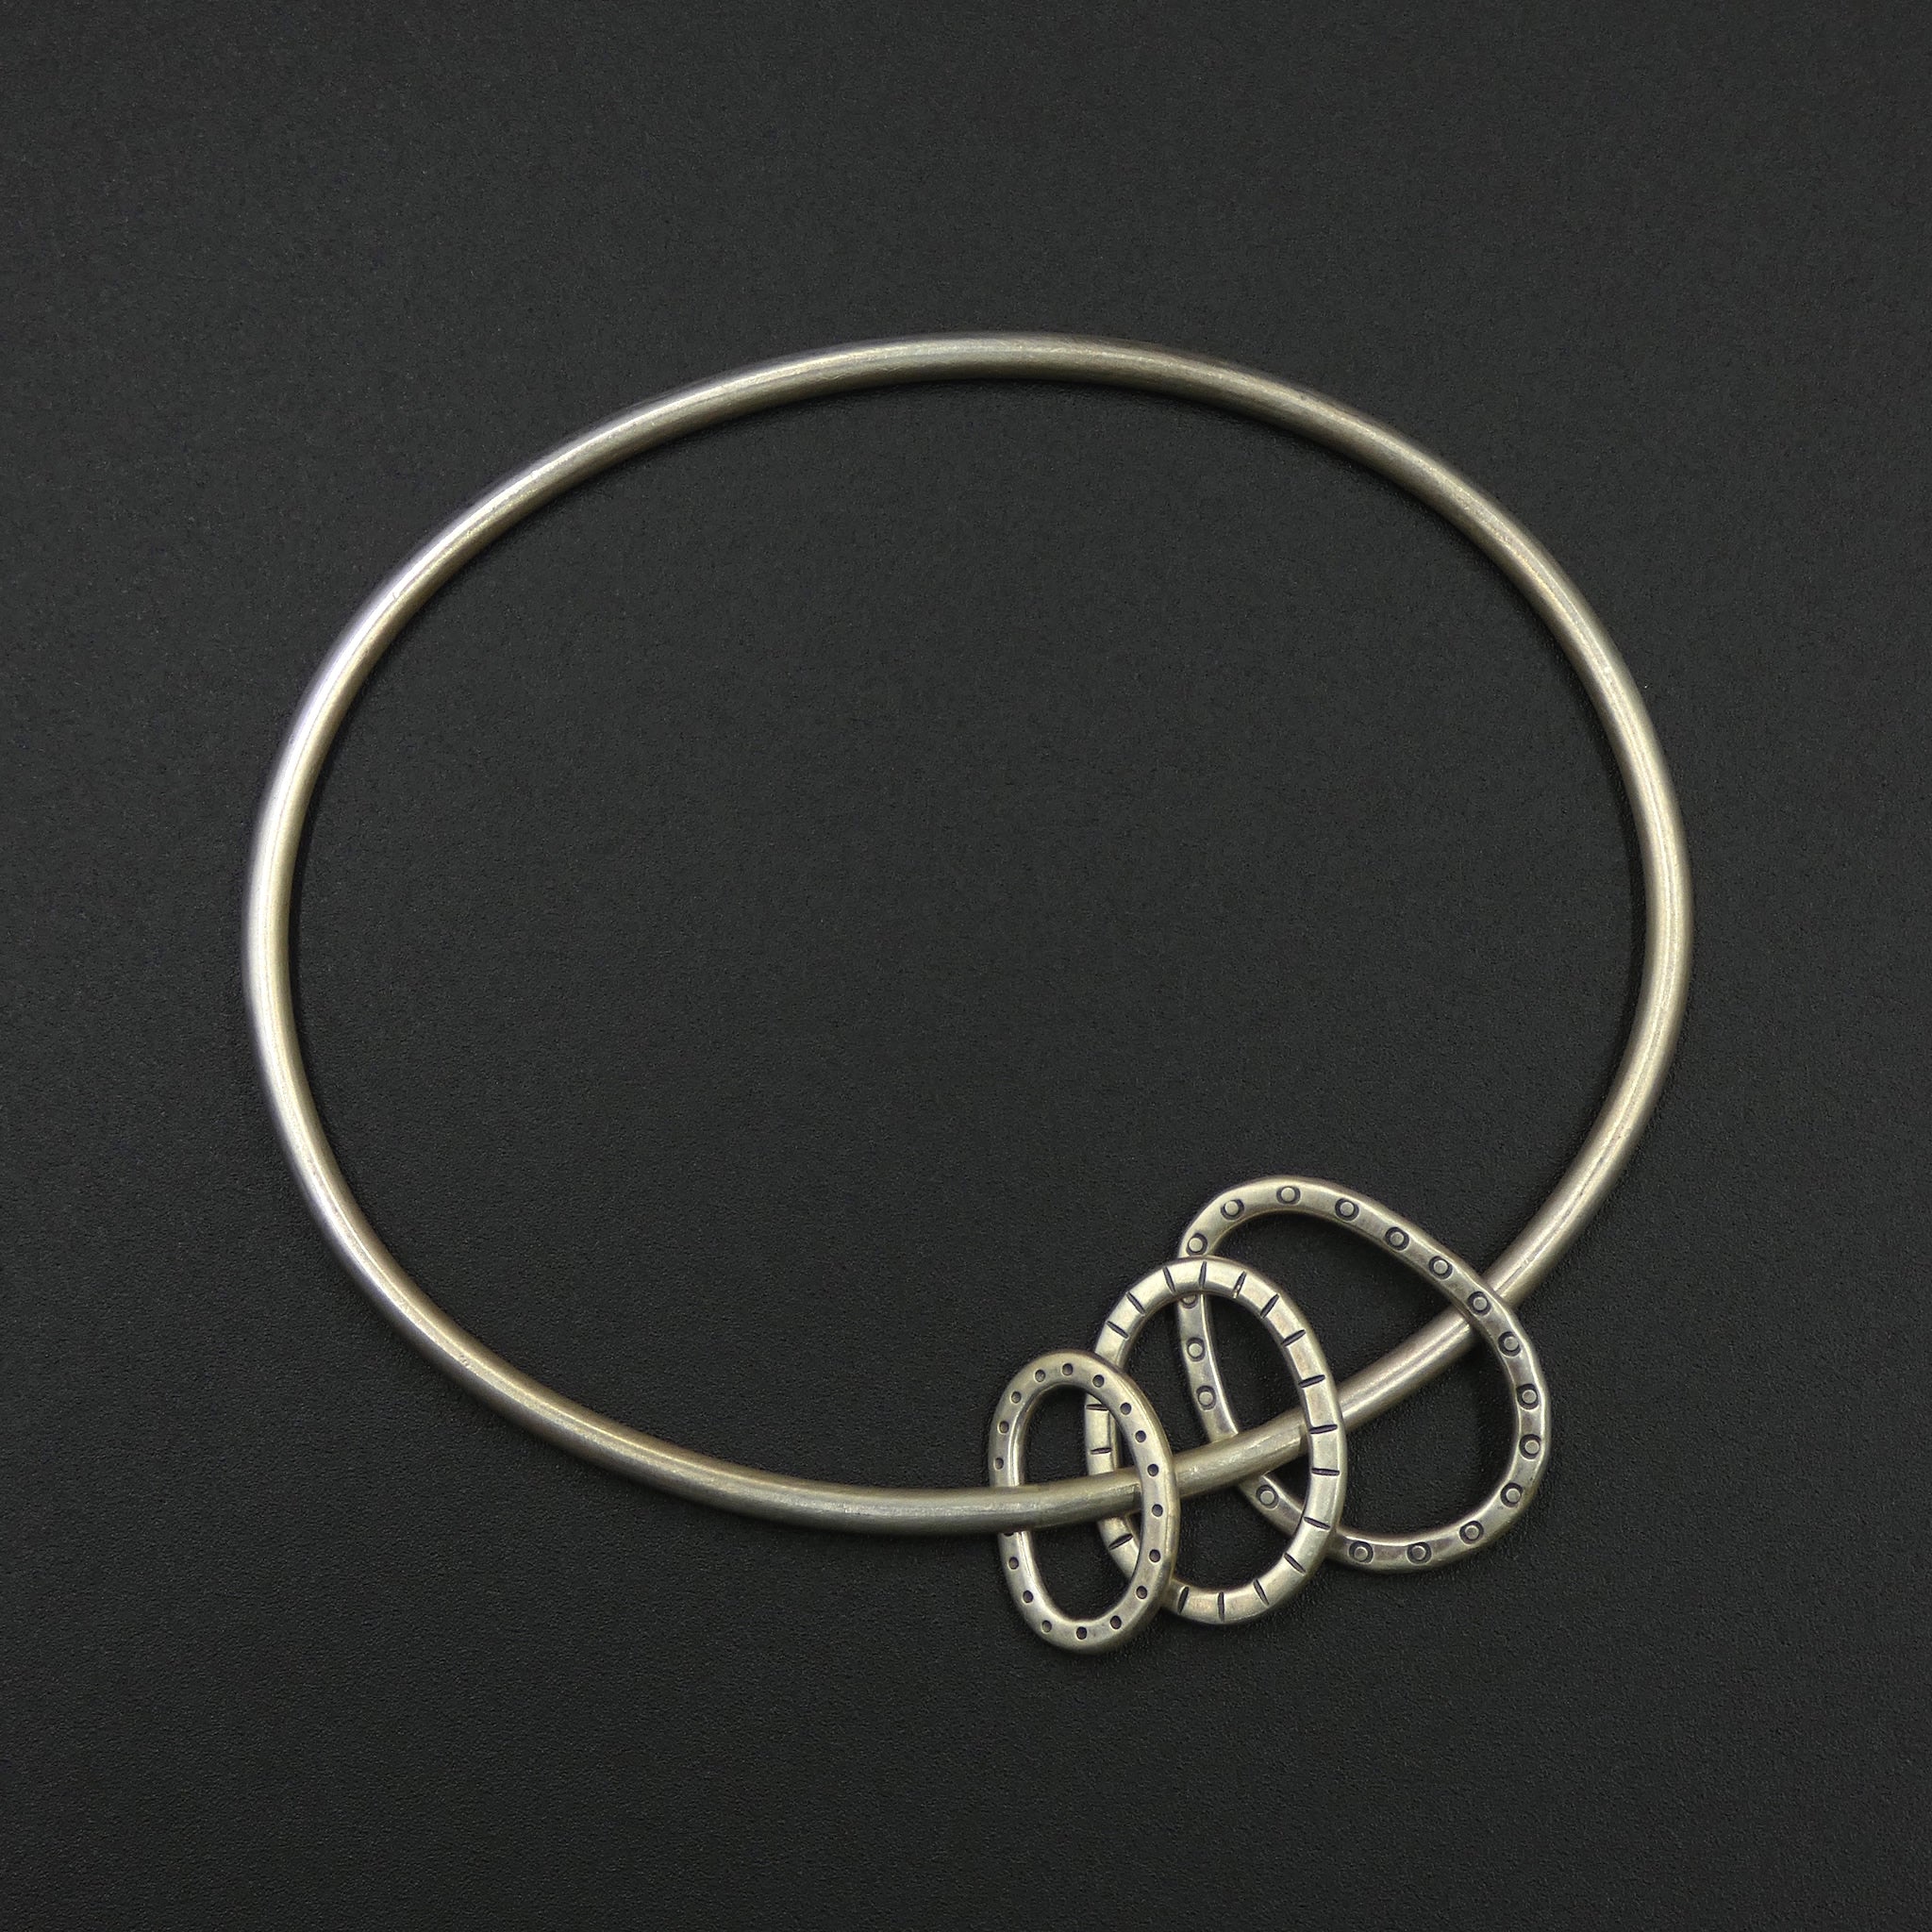 Oval bangle with three hoops by jeweller Helen Shere